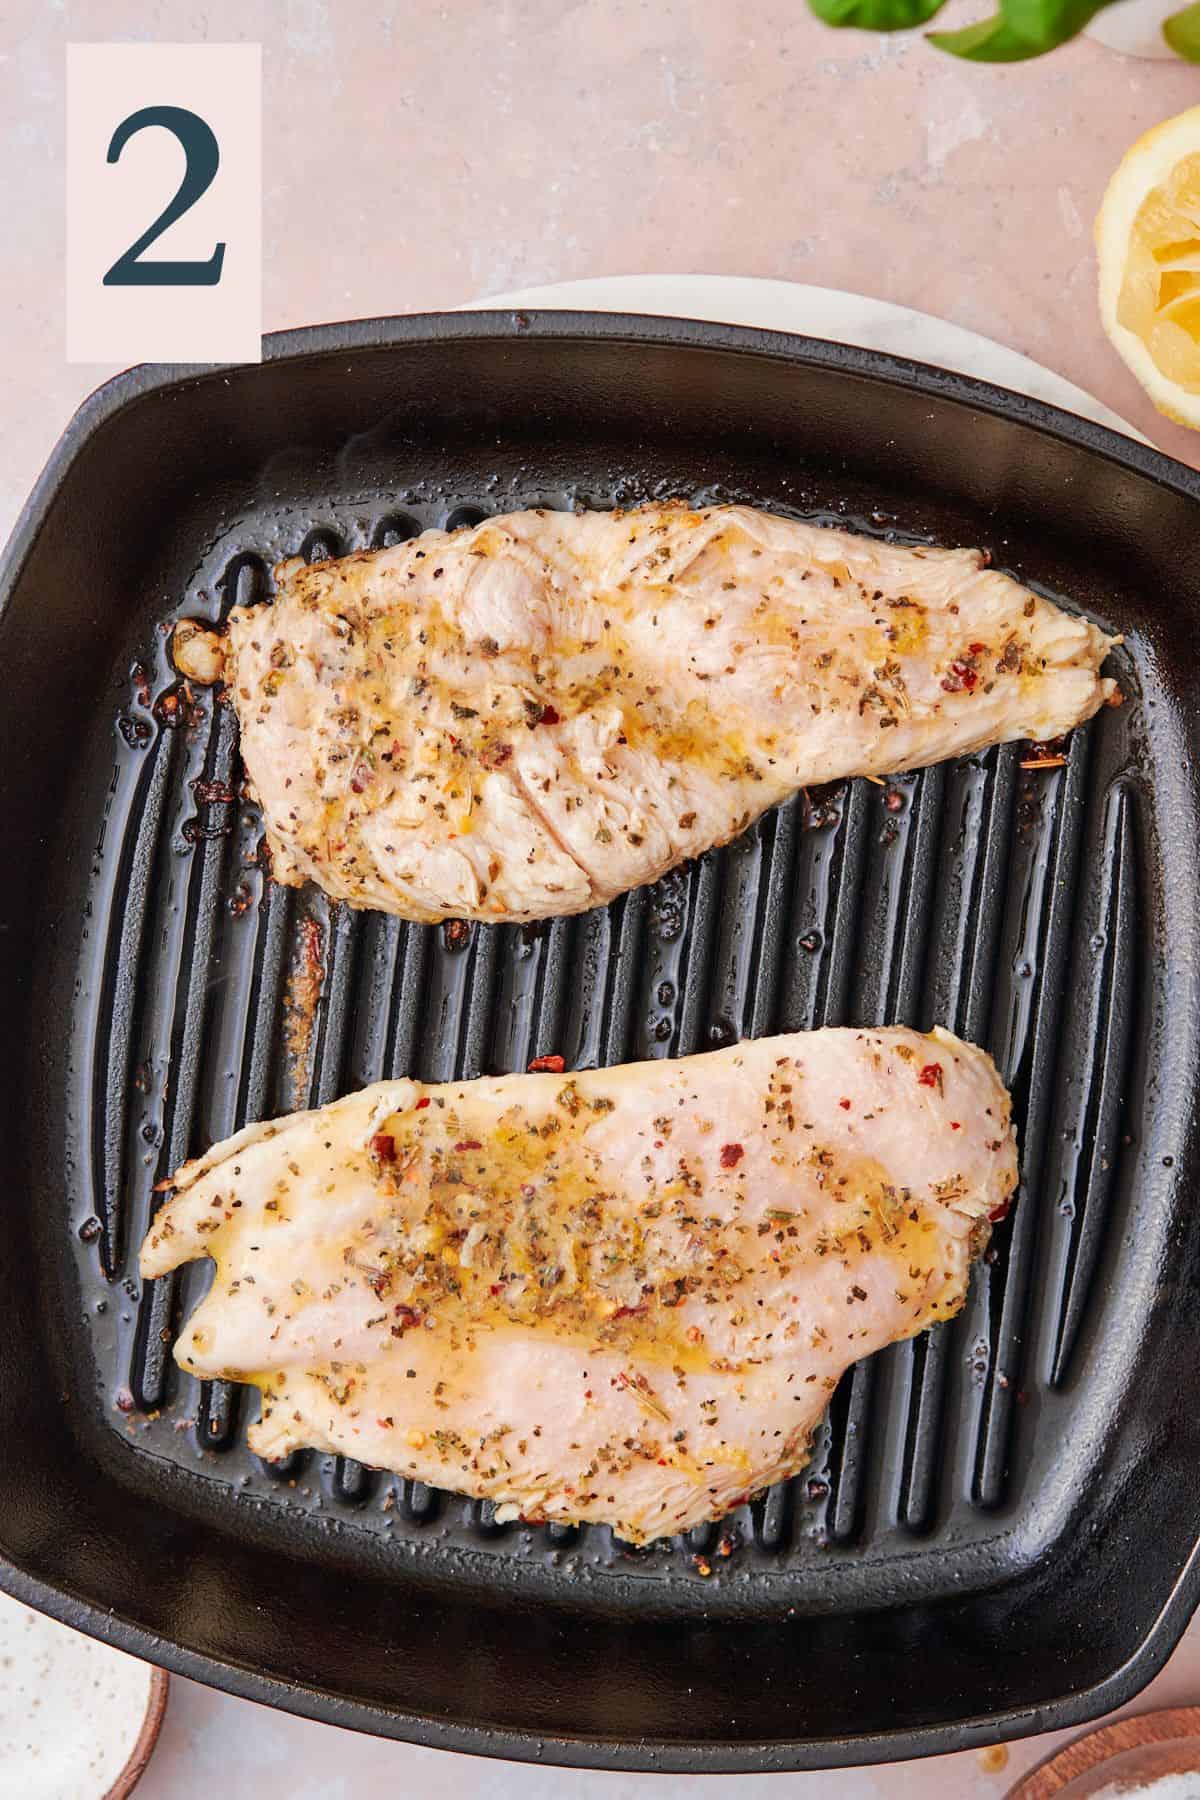 Searing chicken on fry pan with extra olive oil to create delicious sear marks.